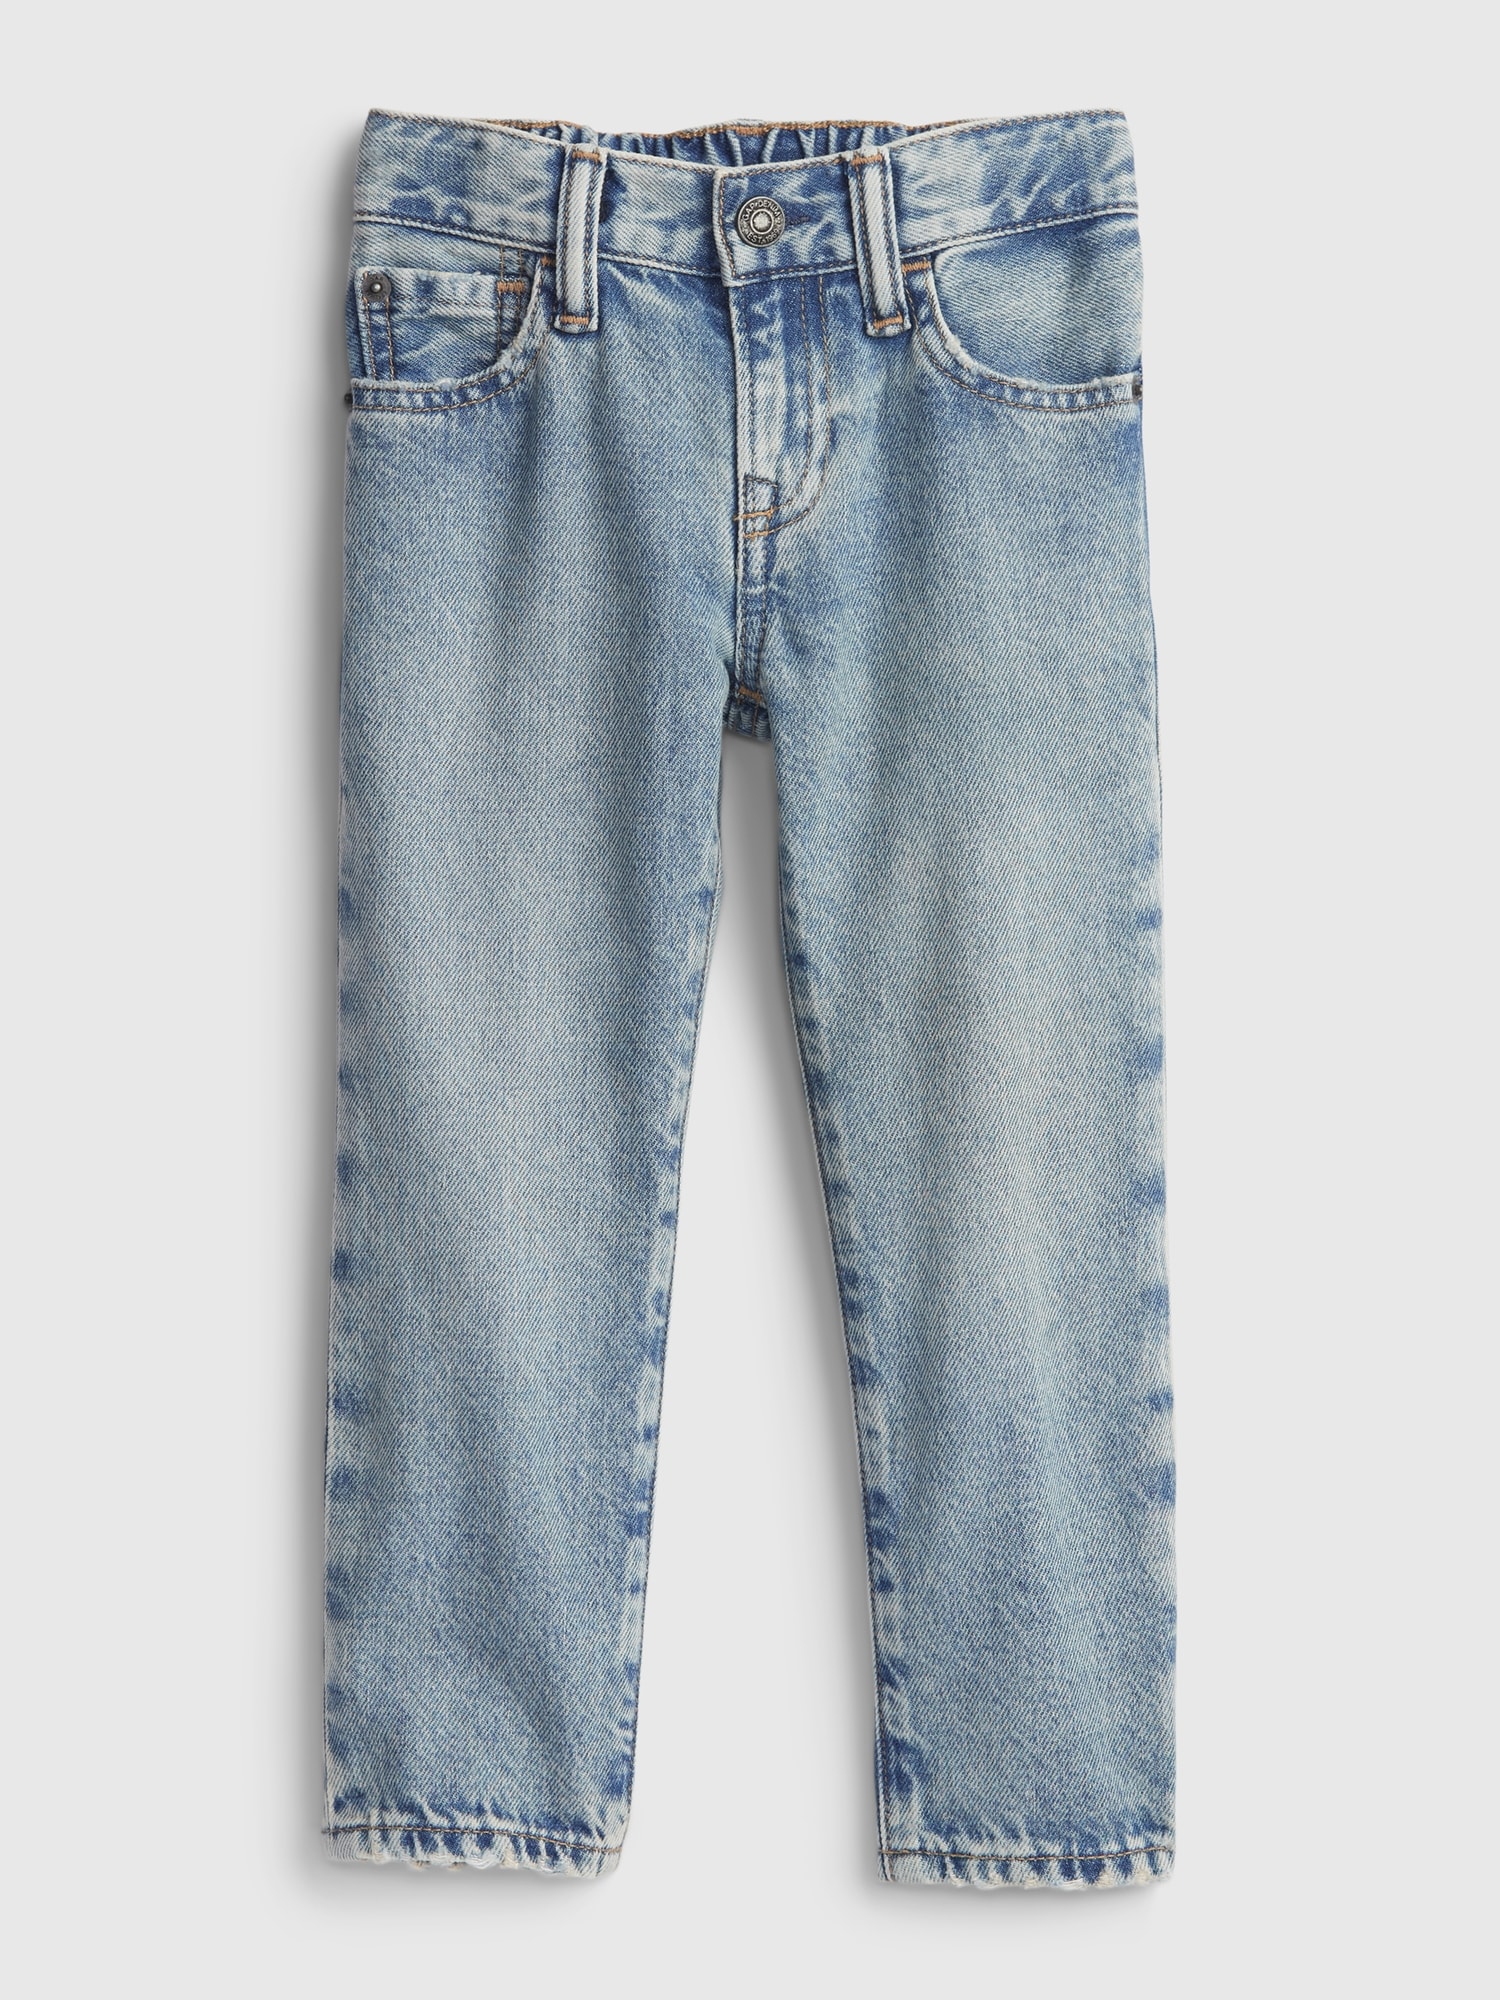 Gap Toddler Original Fit Jeans with Washwell blue. 1